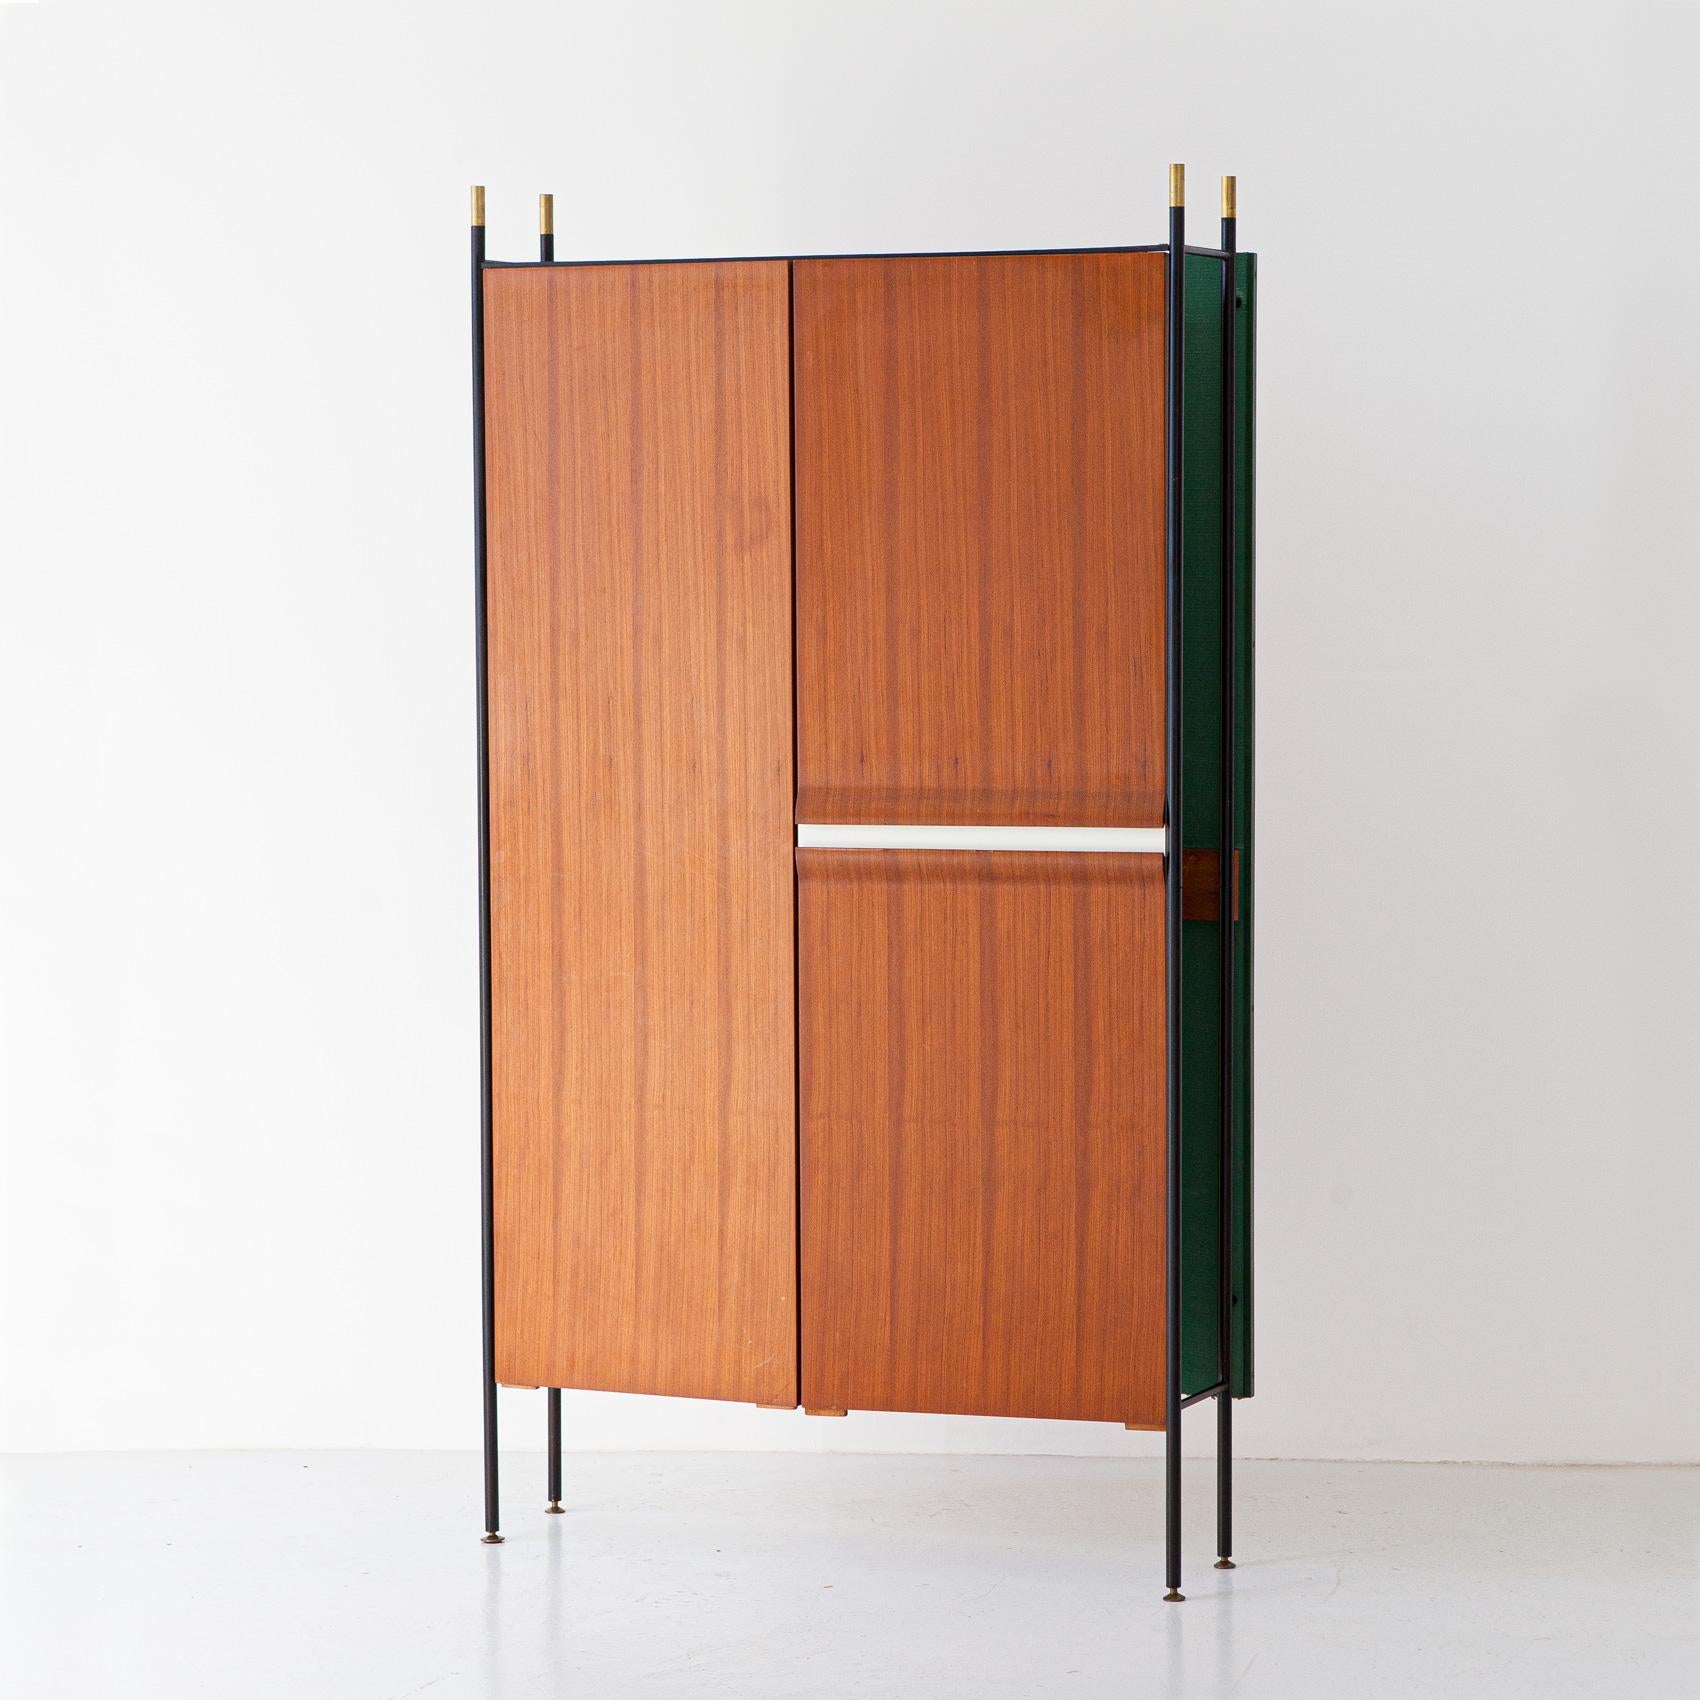 Italian Wardrobe, teak, green fabric, iron and brass, 1950s

This incredible cabinet of mid-century modern Italian design boasts ultra modern lines along with technical details of high Italian carpentry.

It has four brass and black enameled